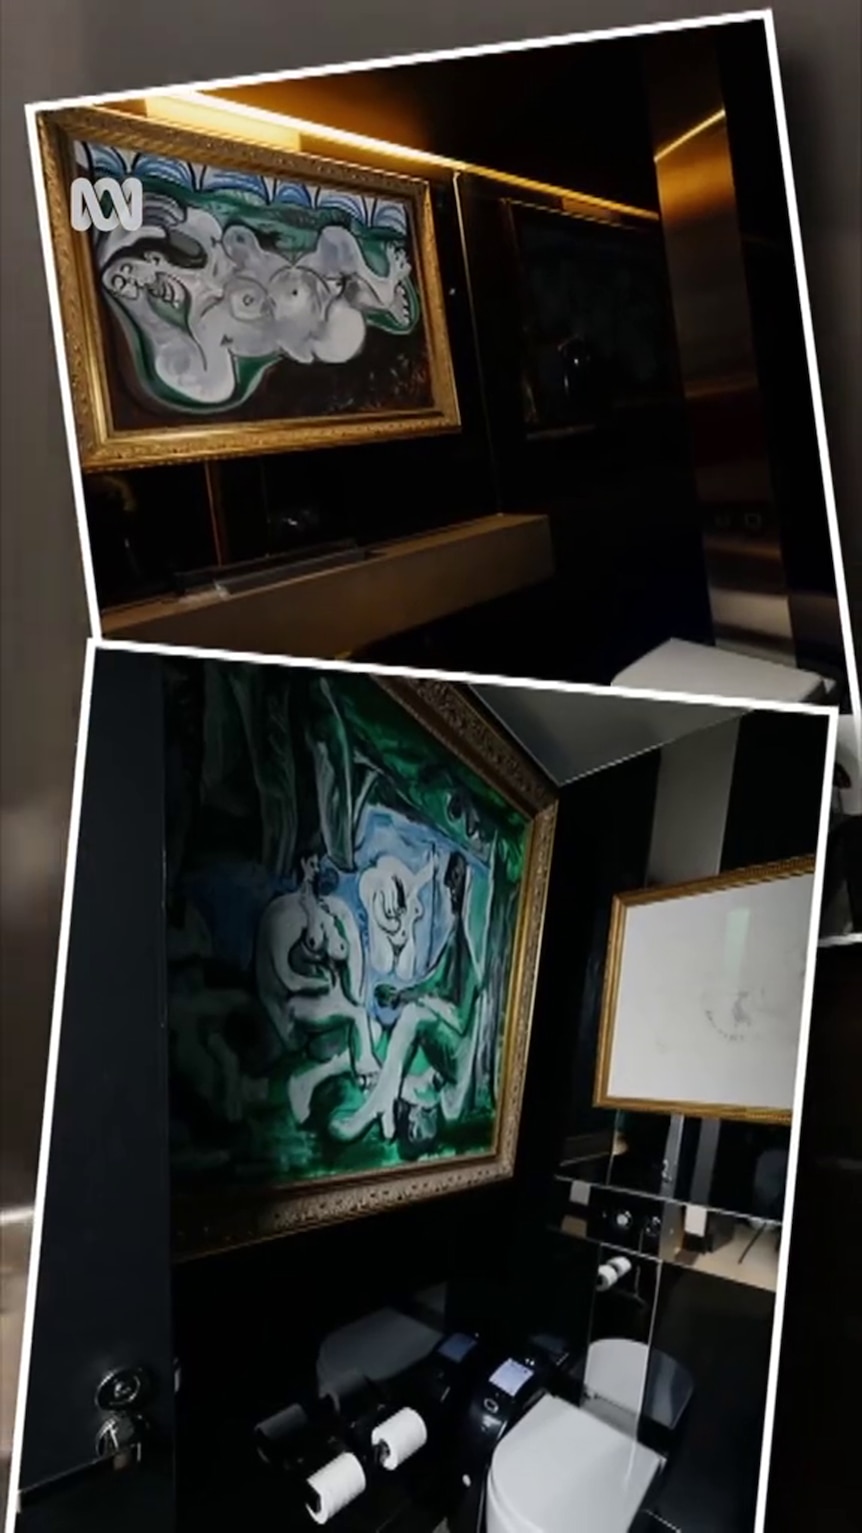 Photo composite shows two images showing artworks hung inside a room with a toilet also visible